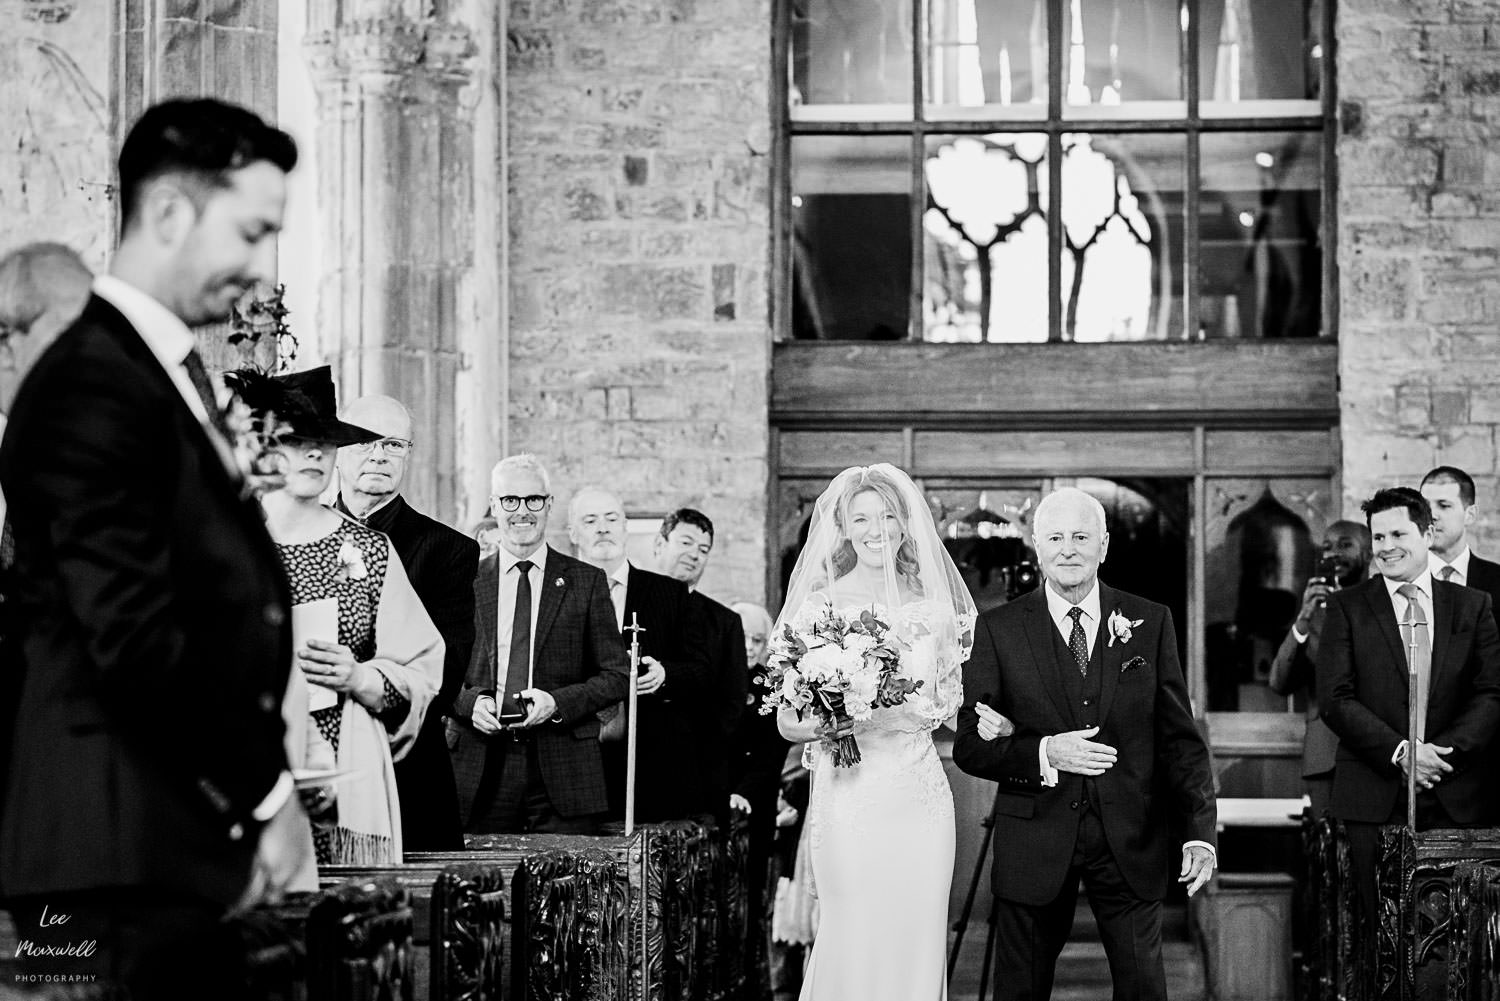 Walking down the aisle at St Swithin’s church